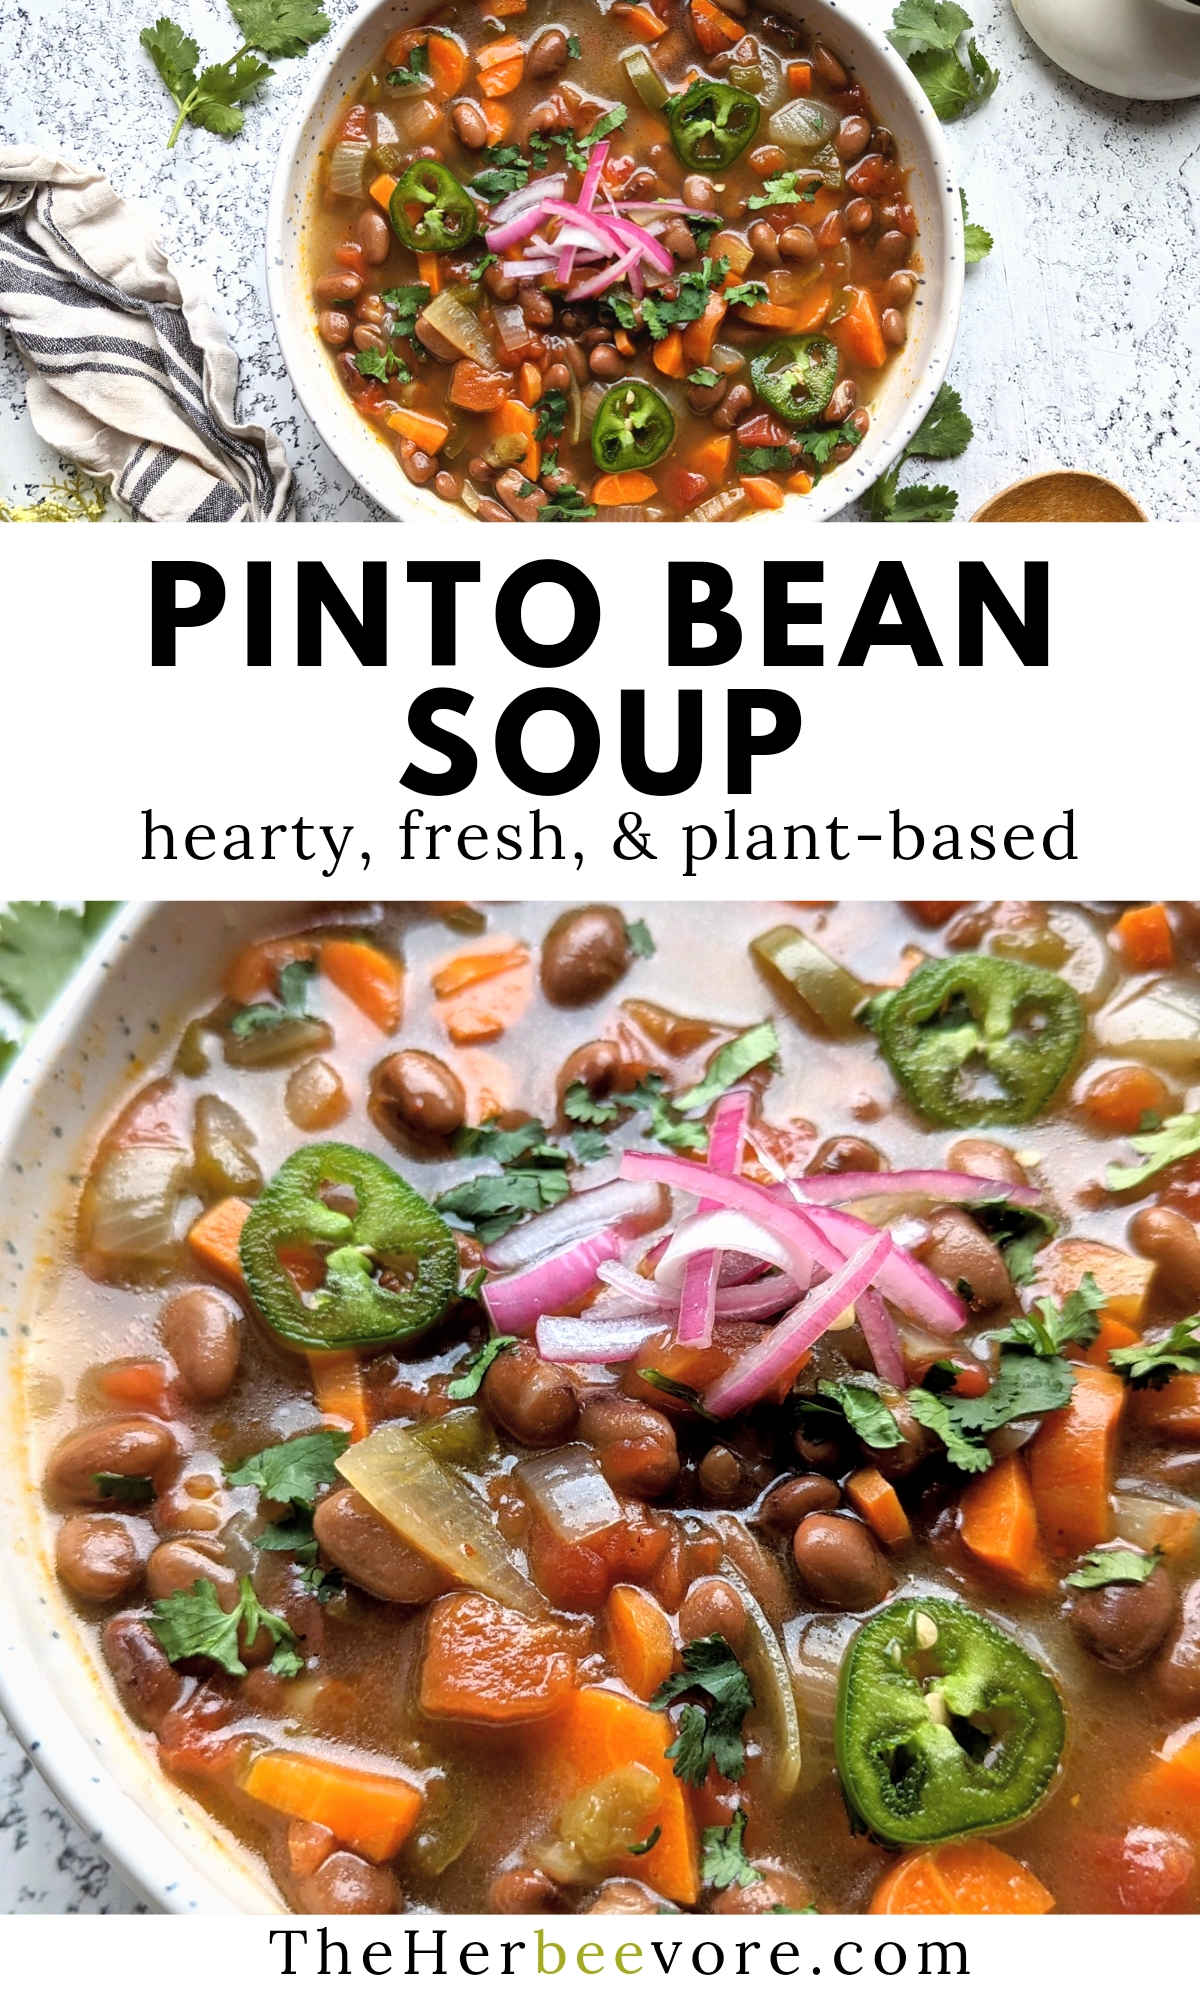 pinto bean soup recipe vegan vegetarian healthy fresh and spicy soup recipes with beans